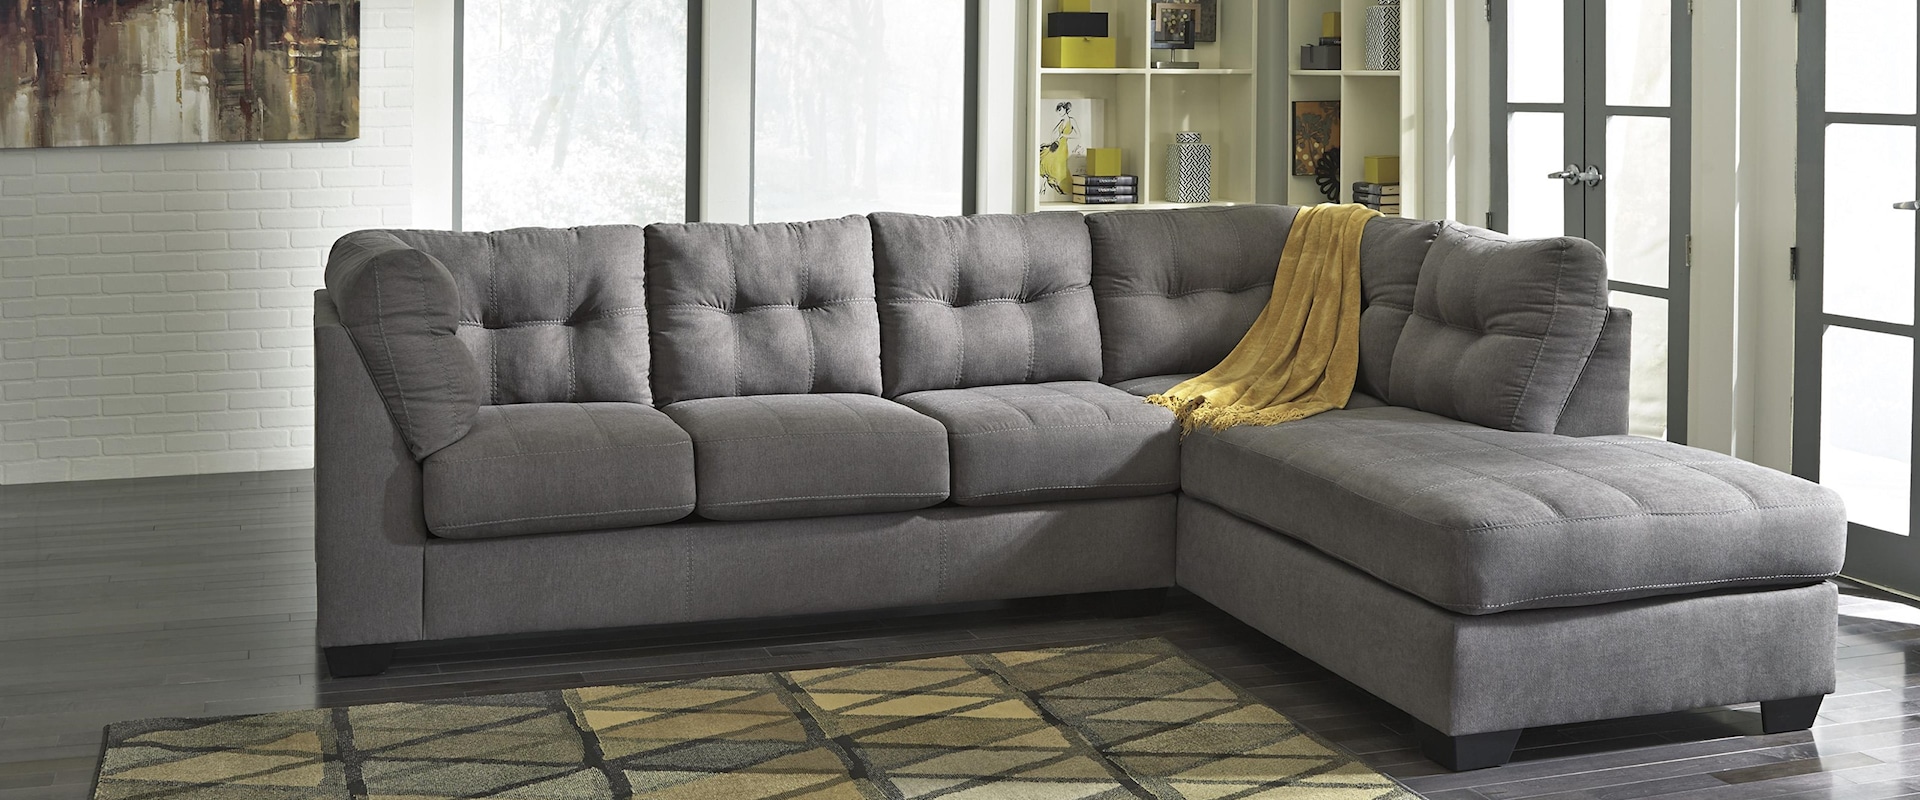 2 Piece Sectional Chaise Sofa and Recliner Set